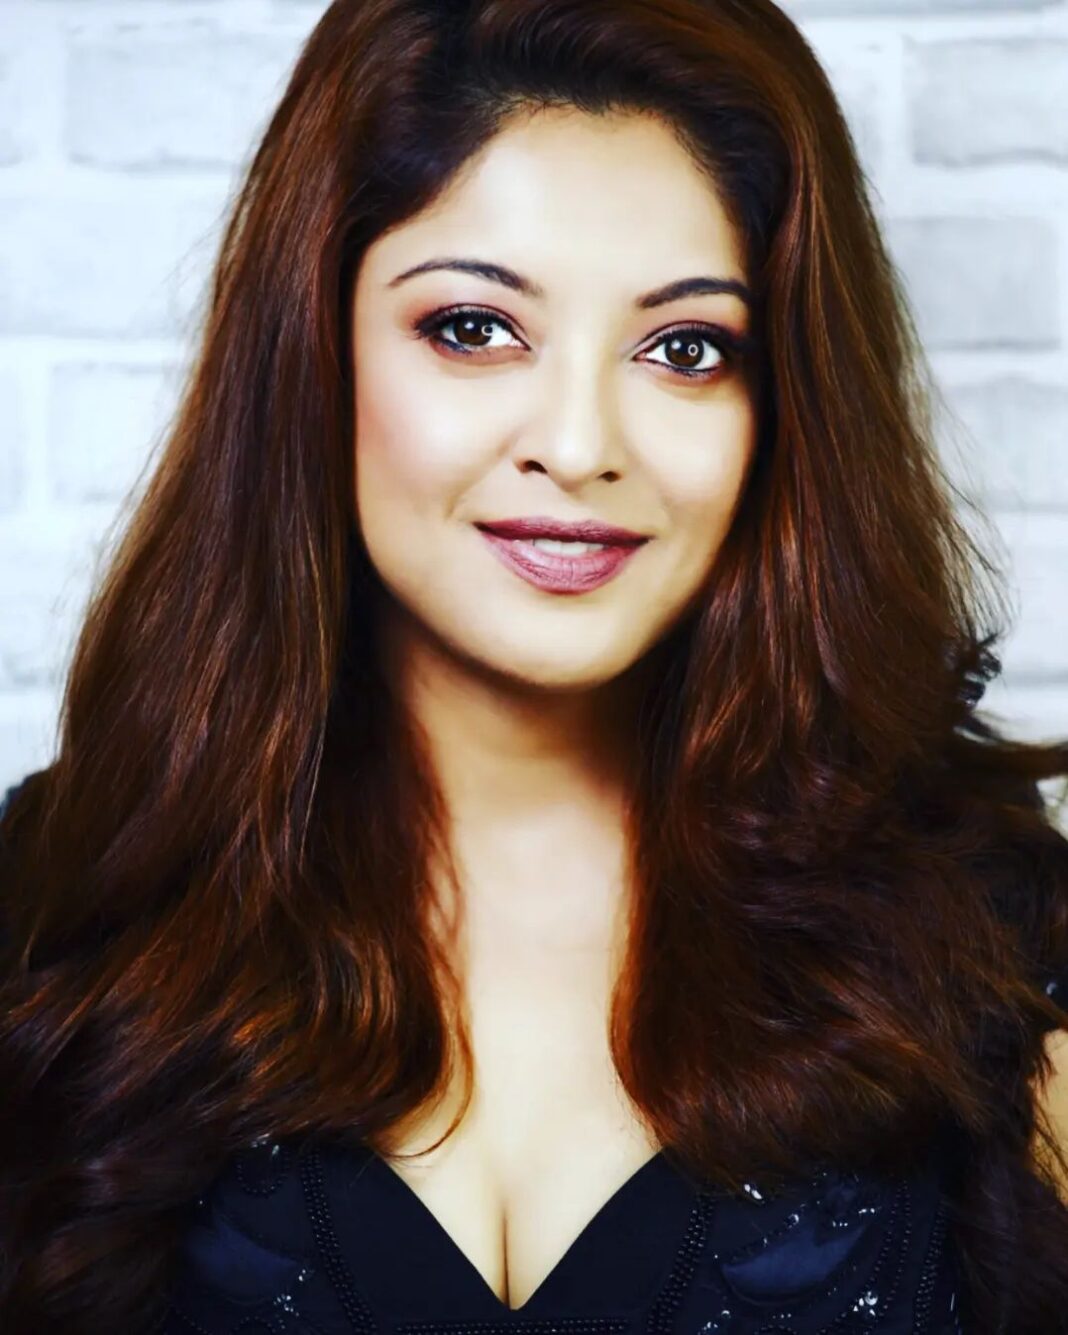 Tanushree Dutta Instagram - And lastly... The worst human being in India is Rakhi Sawant, the Asshole who called for multiple press conferences during the #metoo movement telling horrendous lies after lies and accusing me of being a 